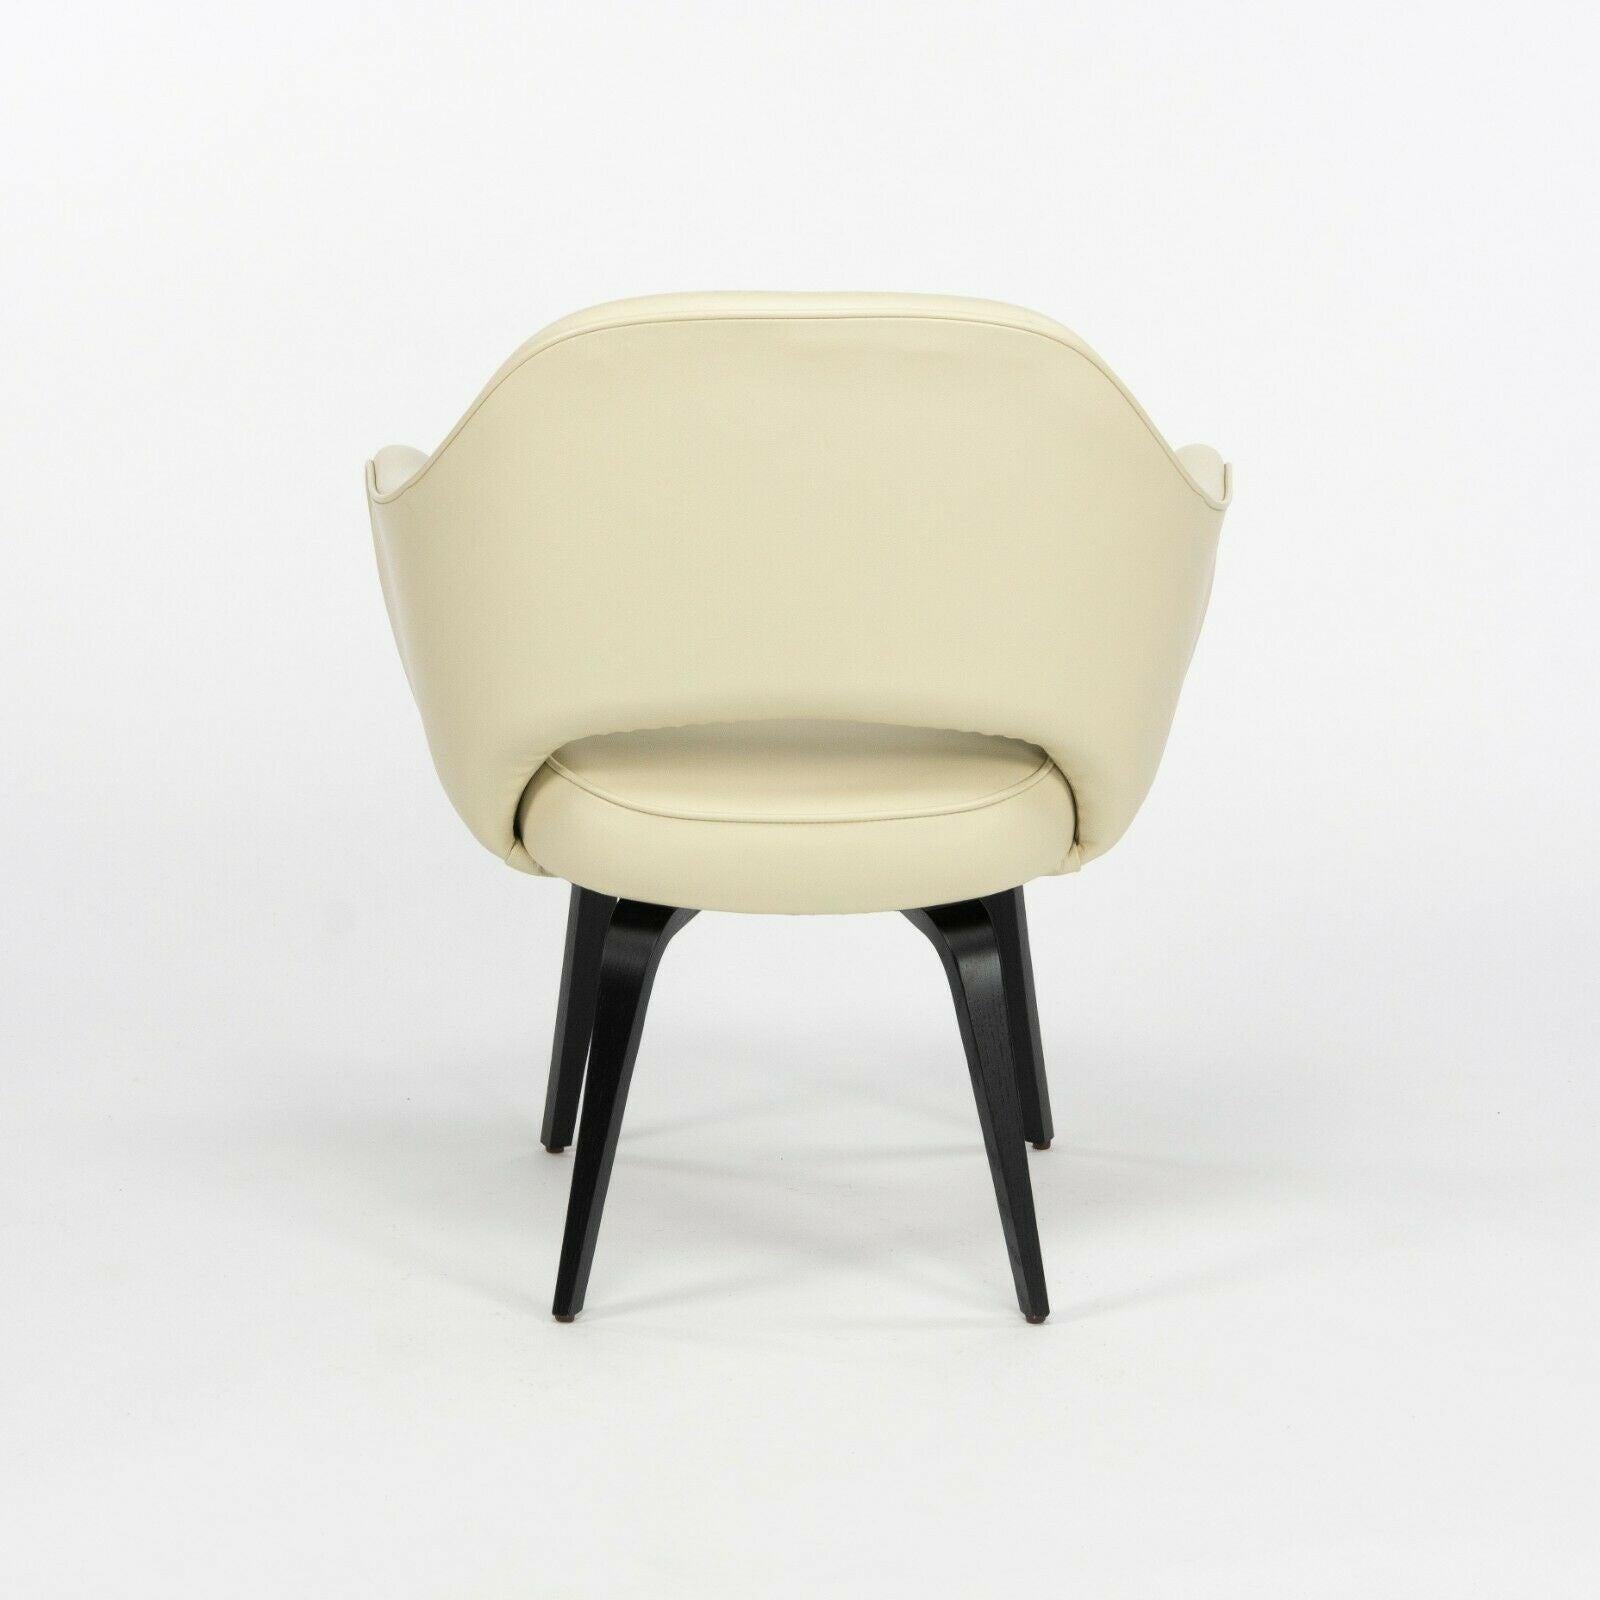 Contemporary Eero Saarinen for Knoll 2020 Executive Armchair with Ivory Leather & Wood Legs For Sale